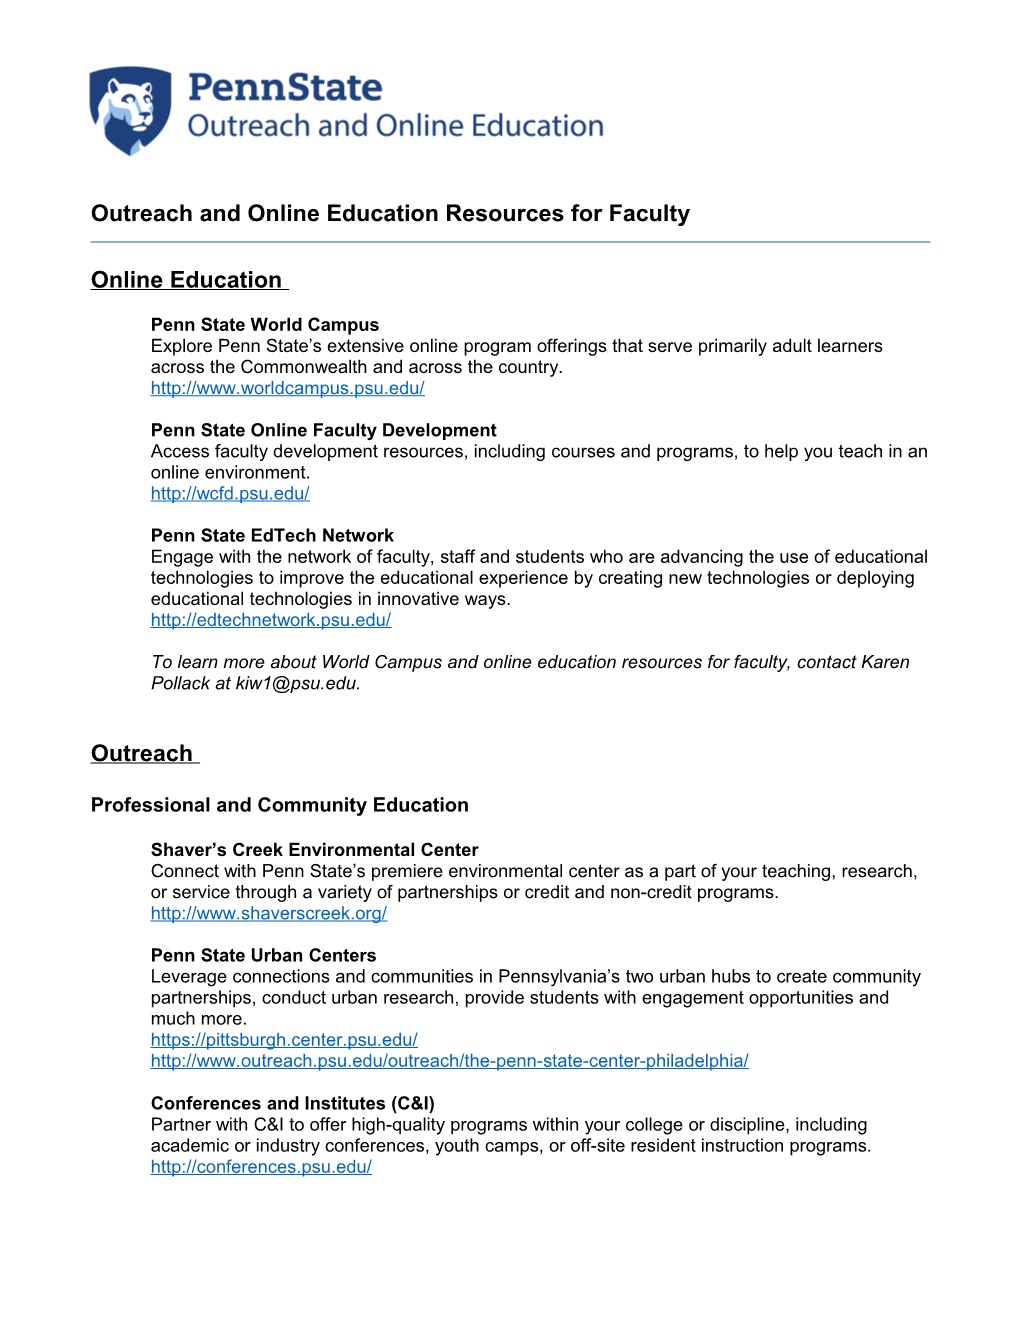 Outreach and Online Education Resources for Faculty